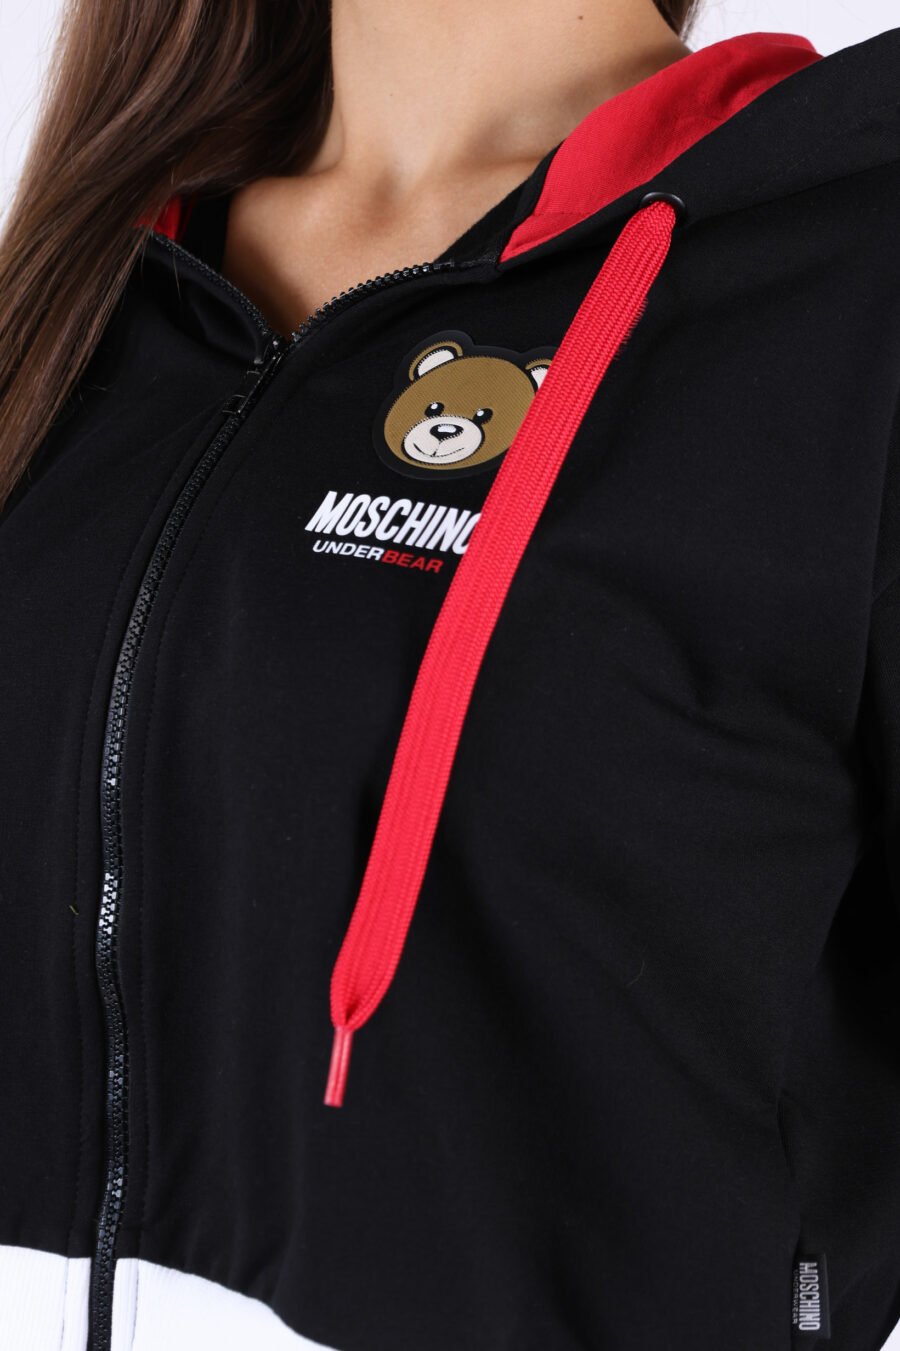 Black and red sweatshirt with hood and bear logo "underbear" patch - 361223054662202225